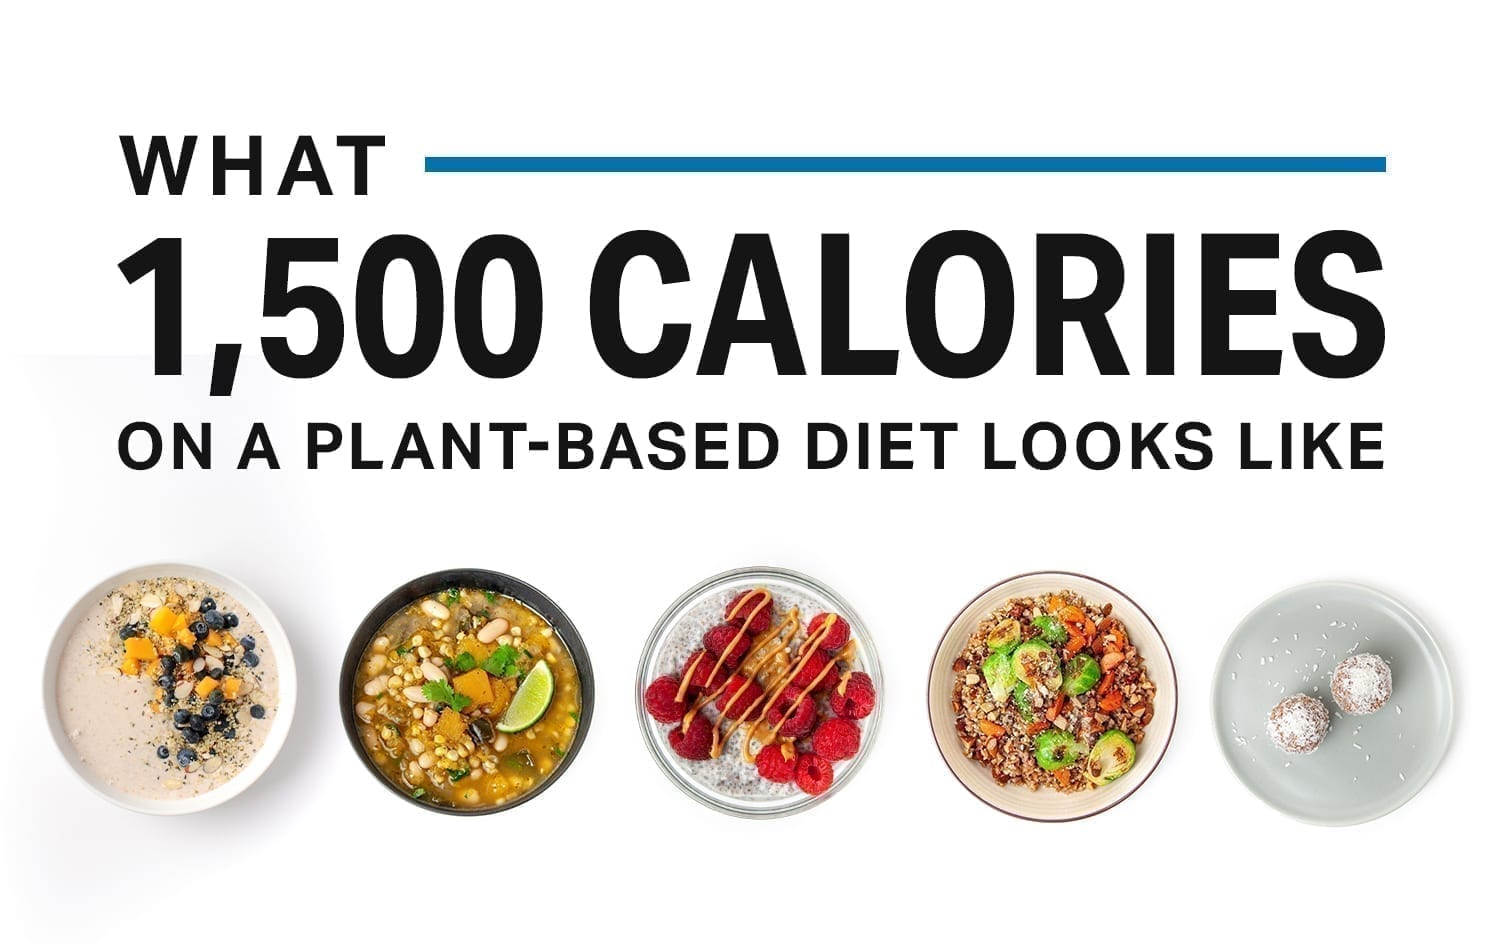 What 1,500 Calories on a Plant-Based Diet Looks Like